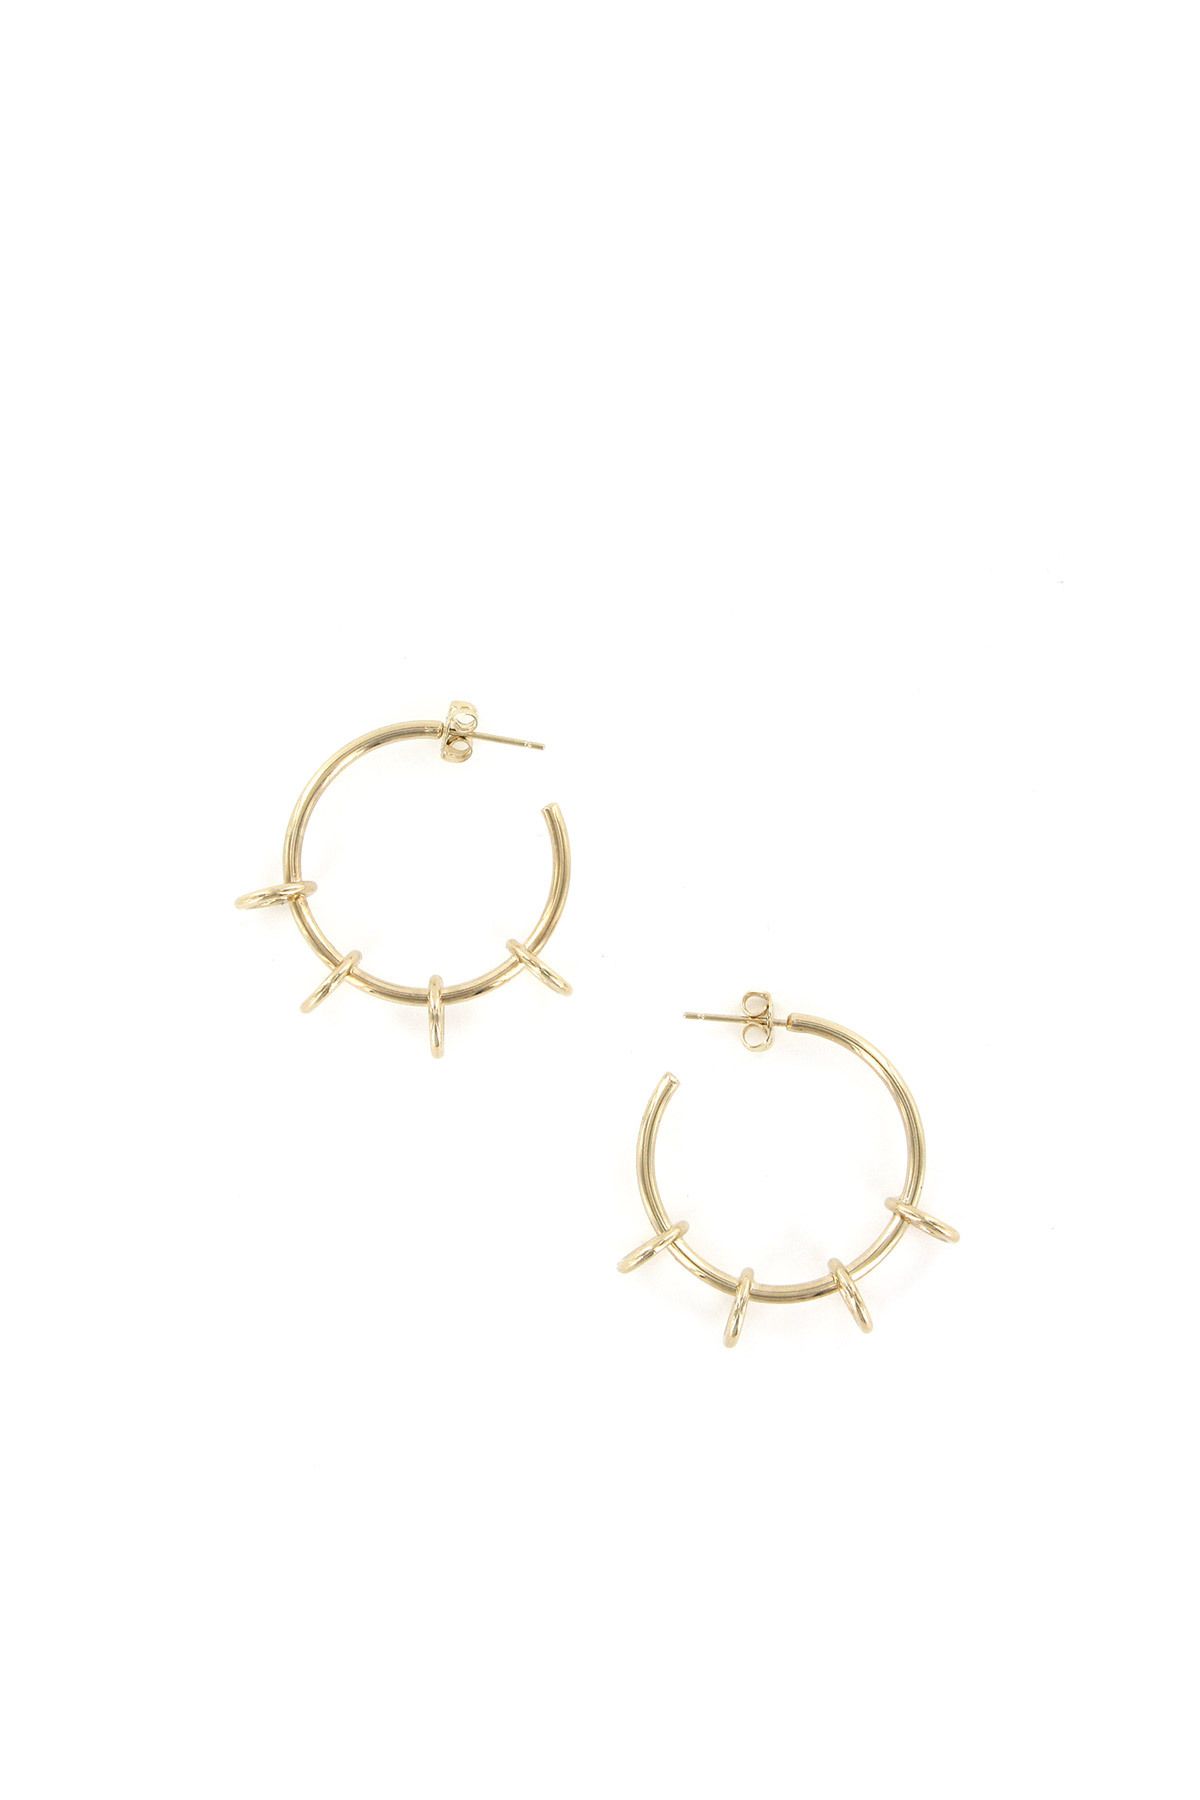 go big or go home: 27 extra-large gold earrings for making a statement